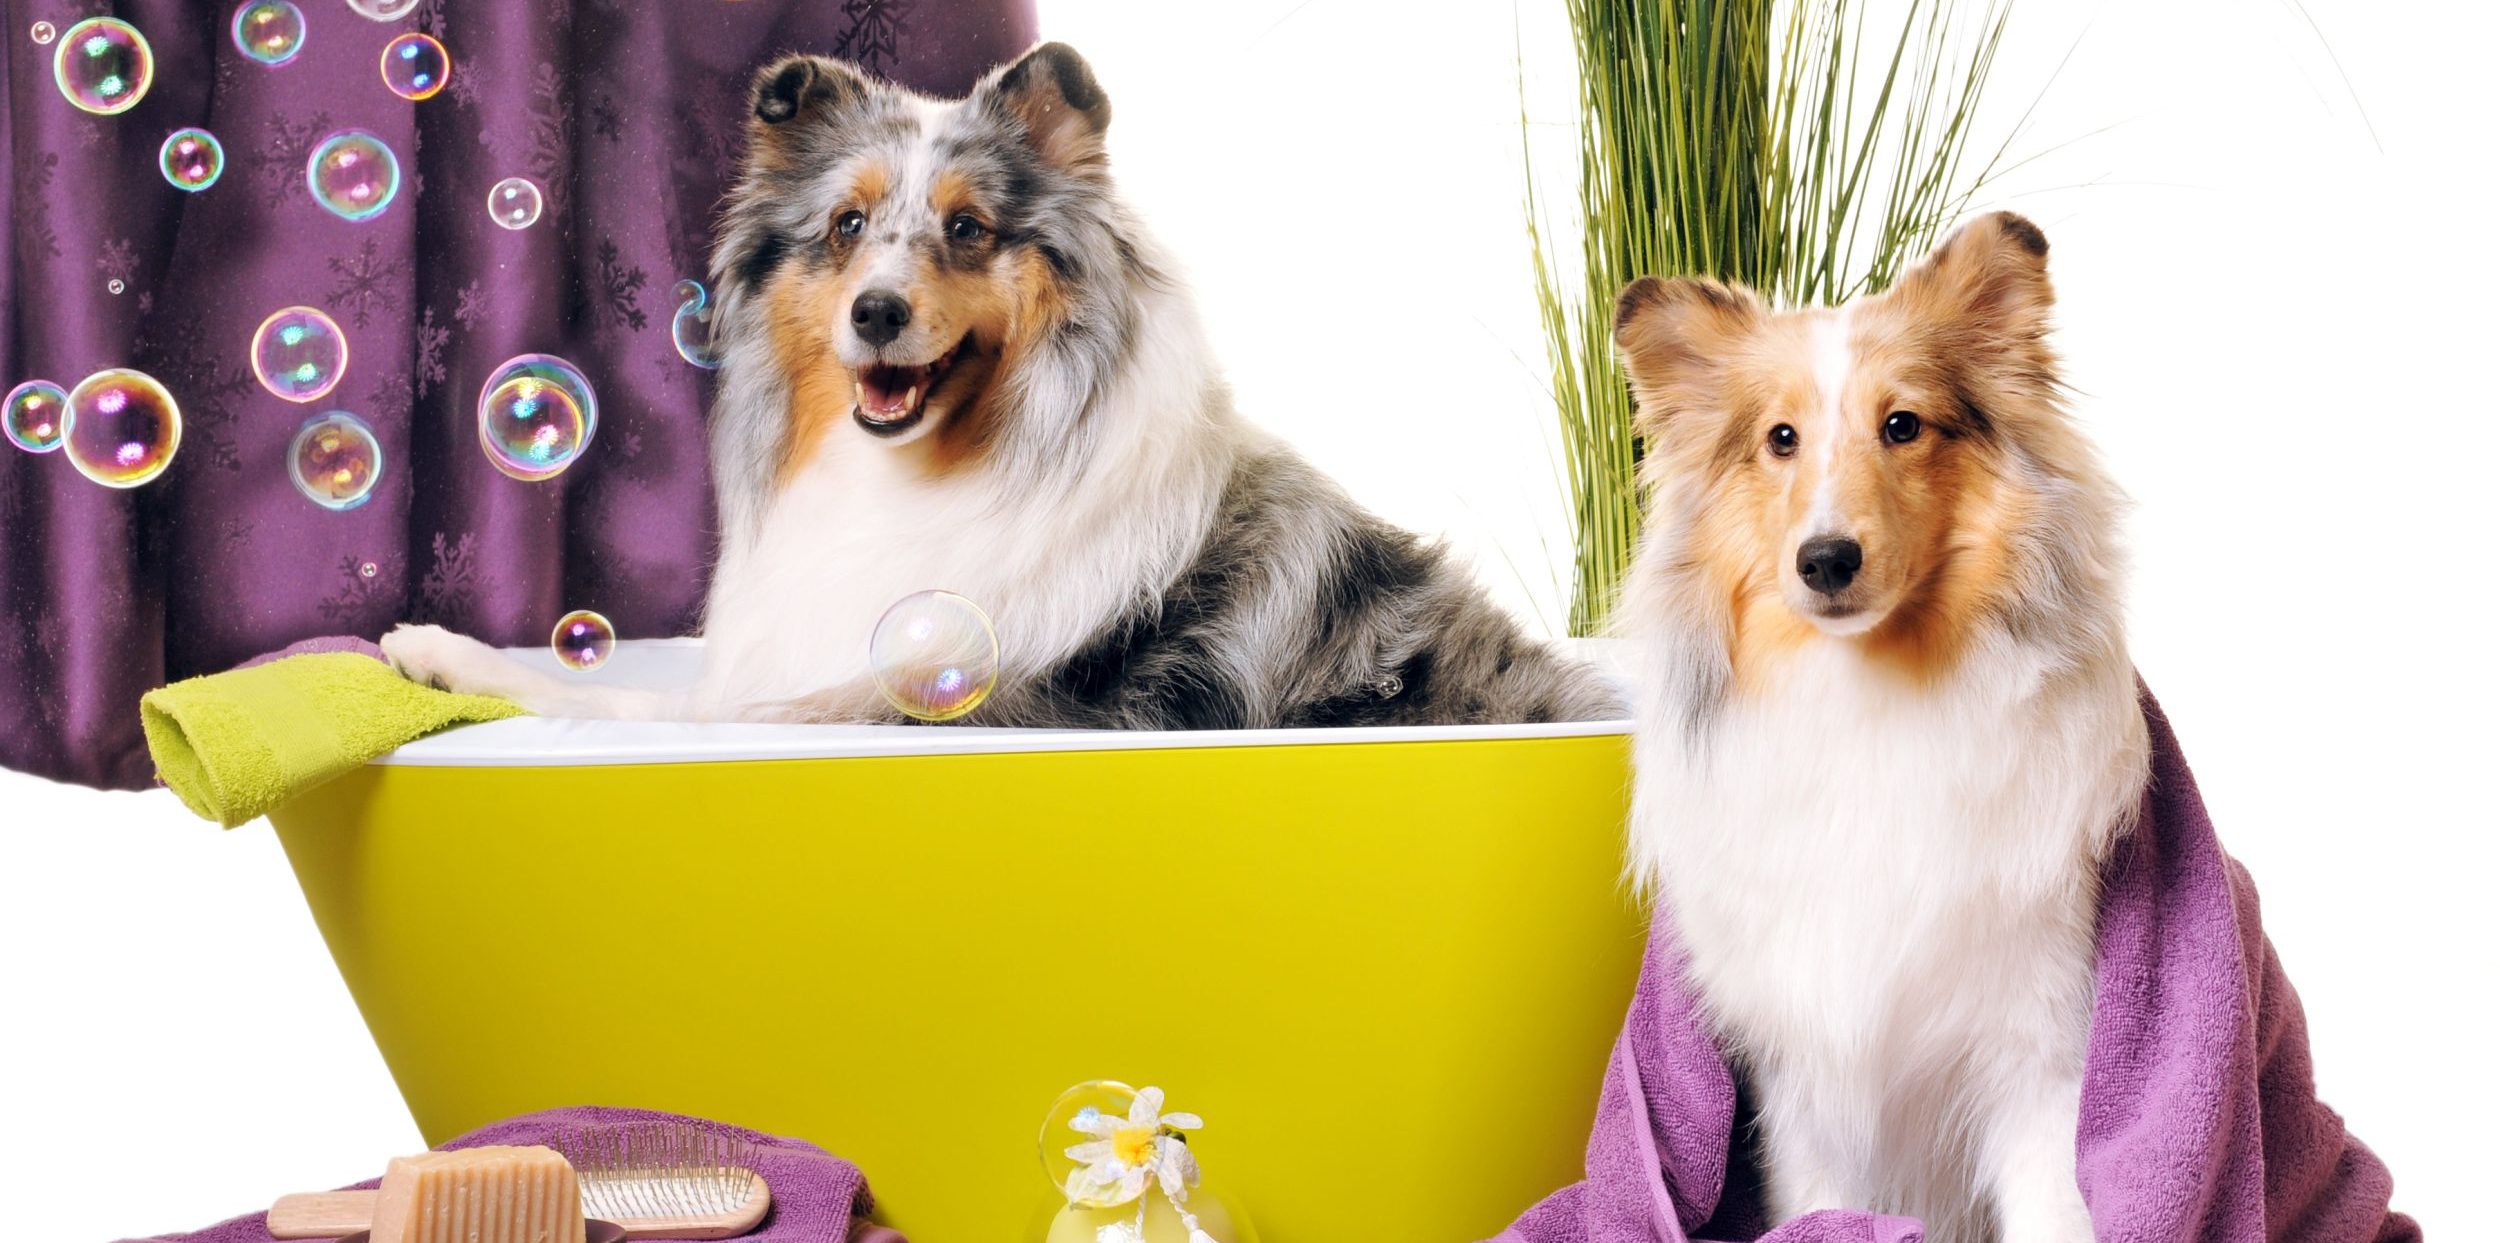 Pet Grooming and Spa: Where Pet Grooming Meets Grooming Excellence